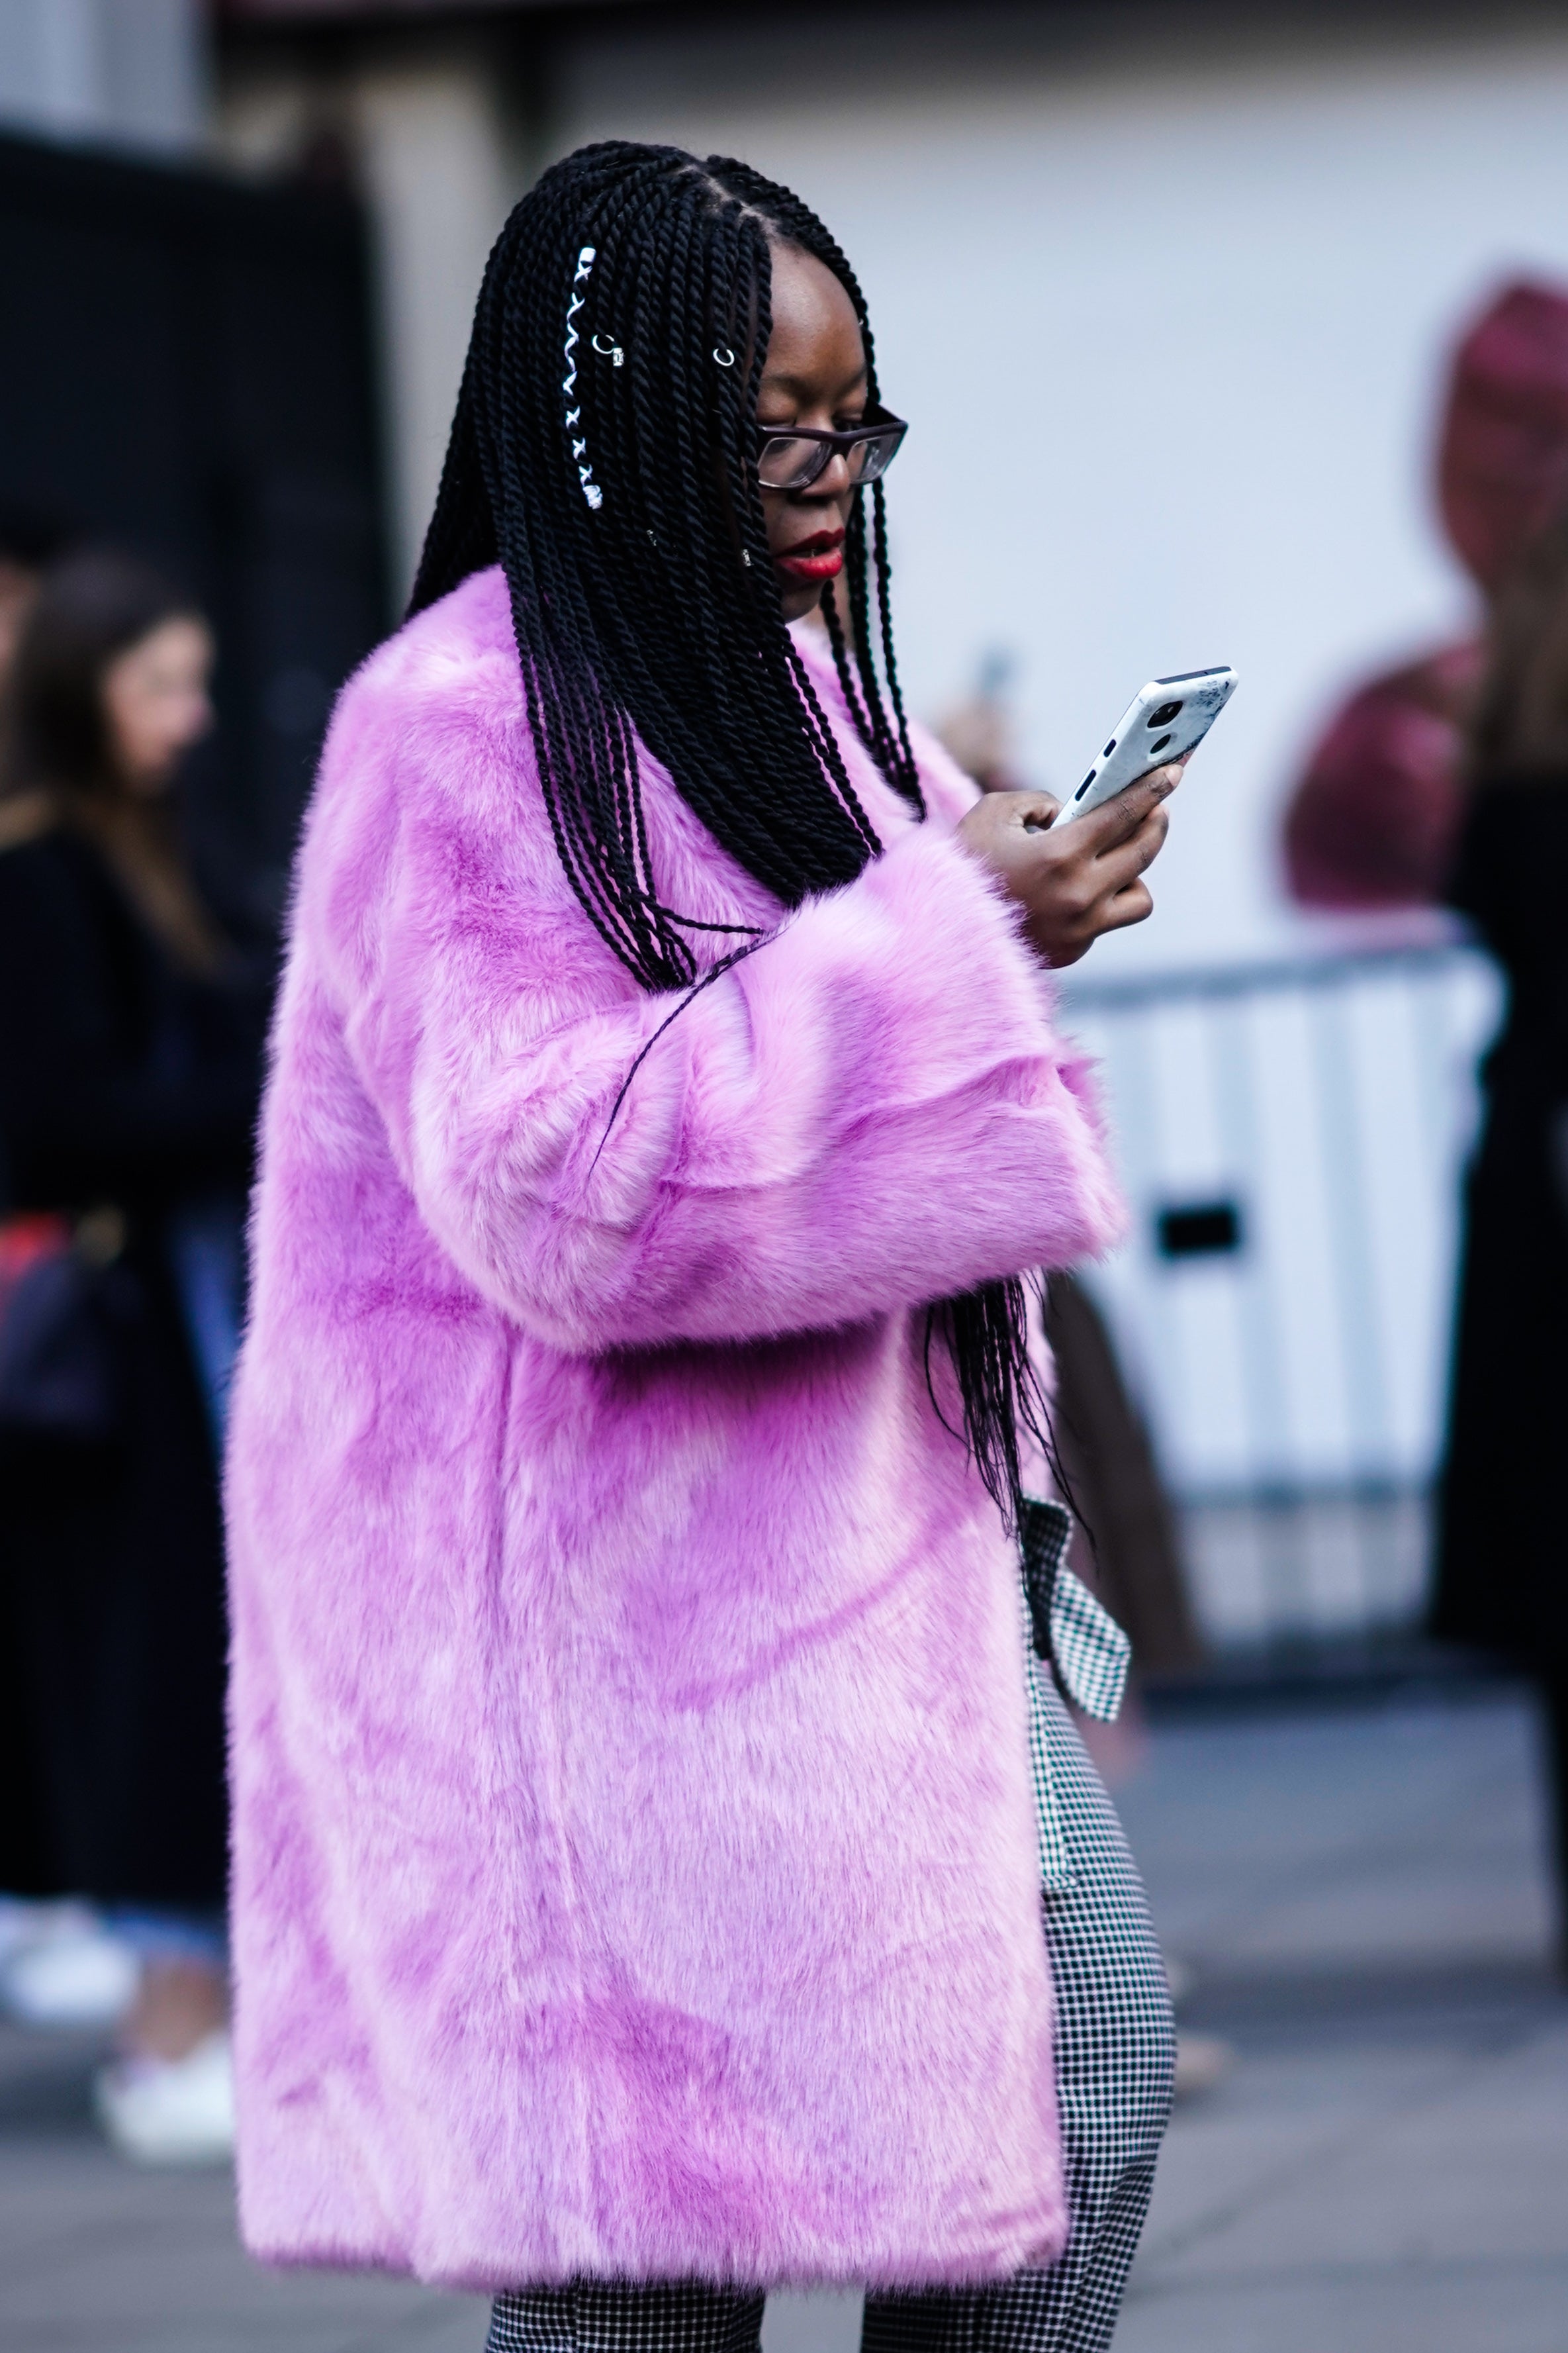 The Best Street Style Looks From Europe, With Love